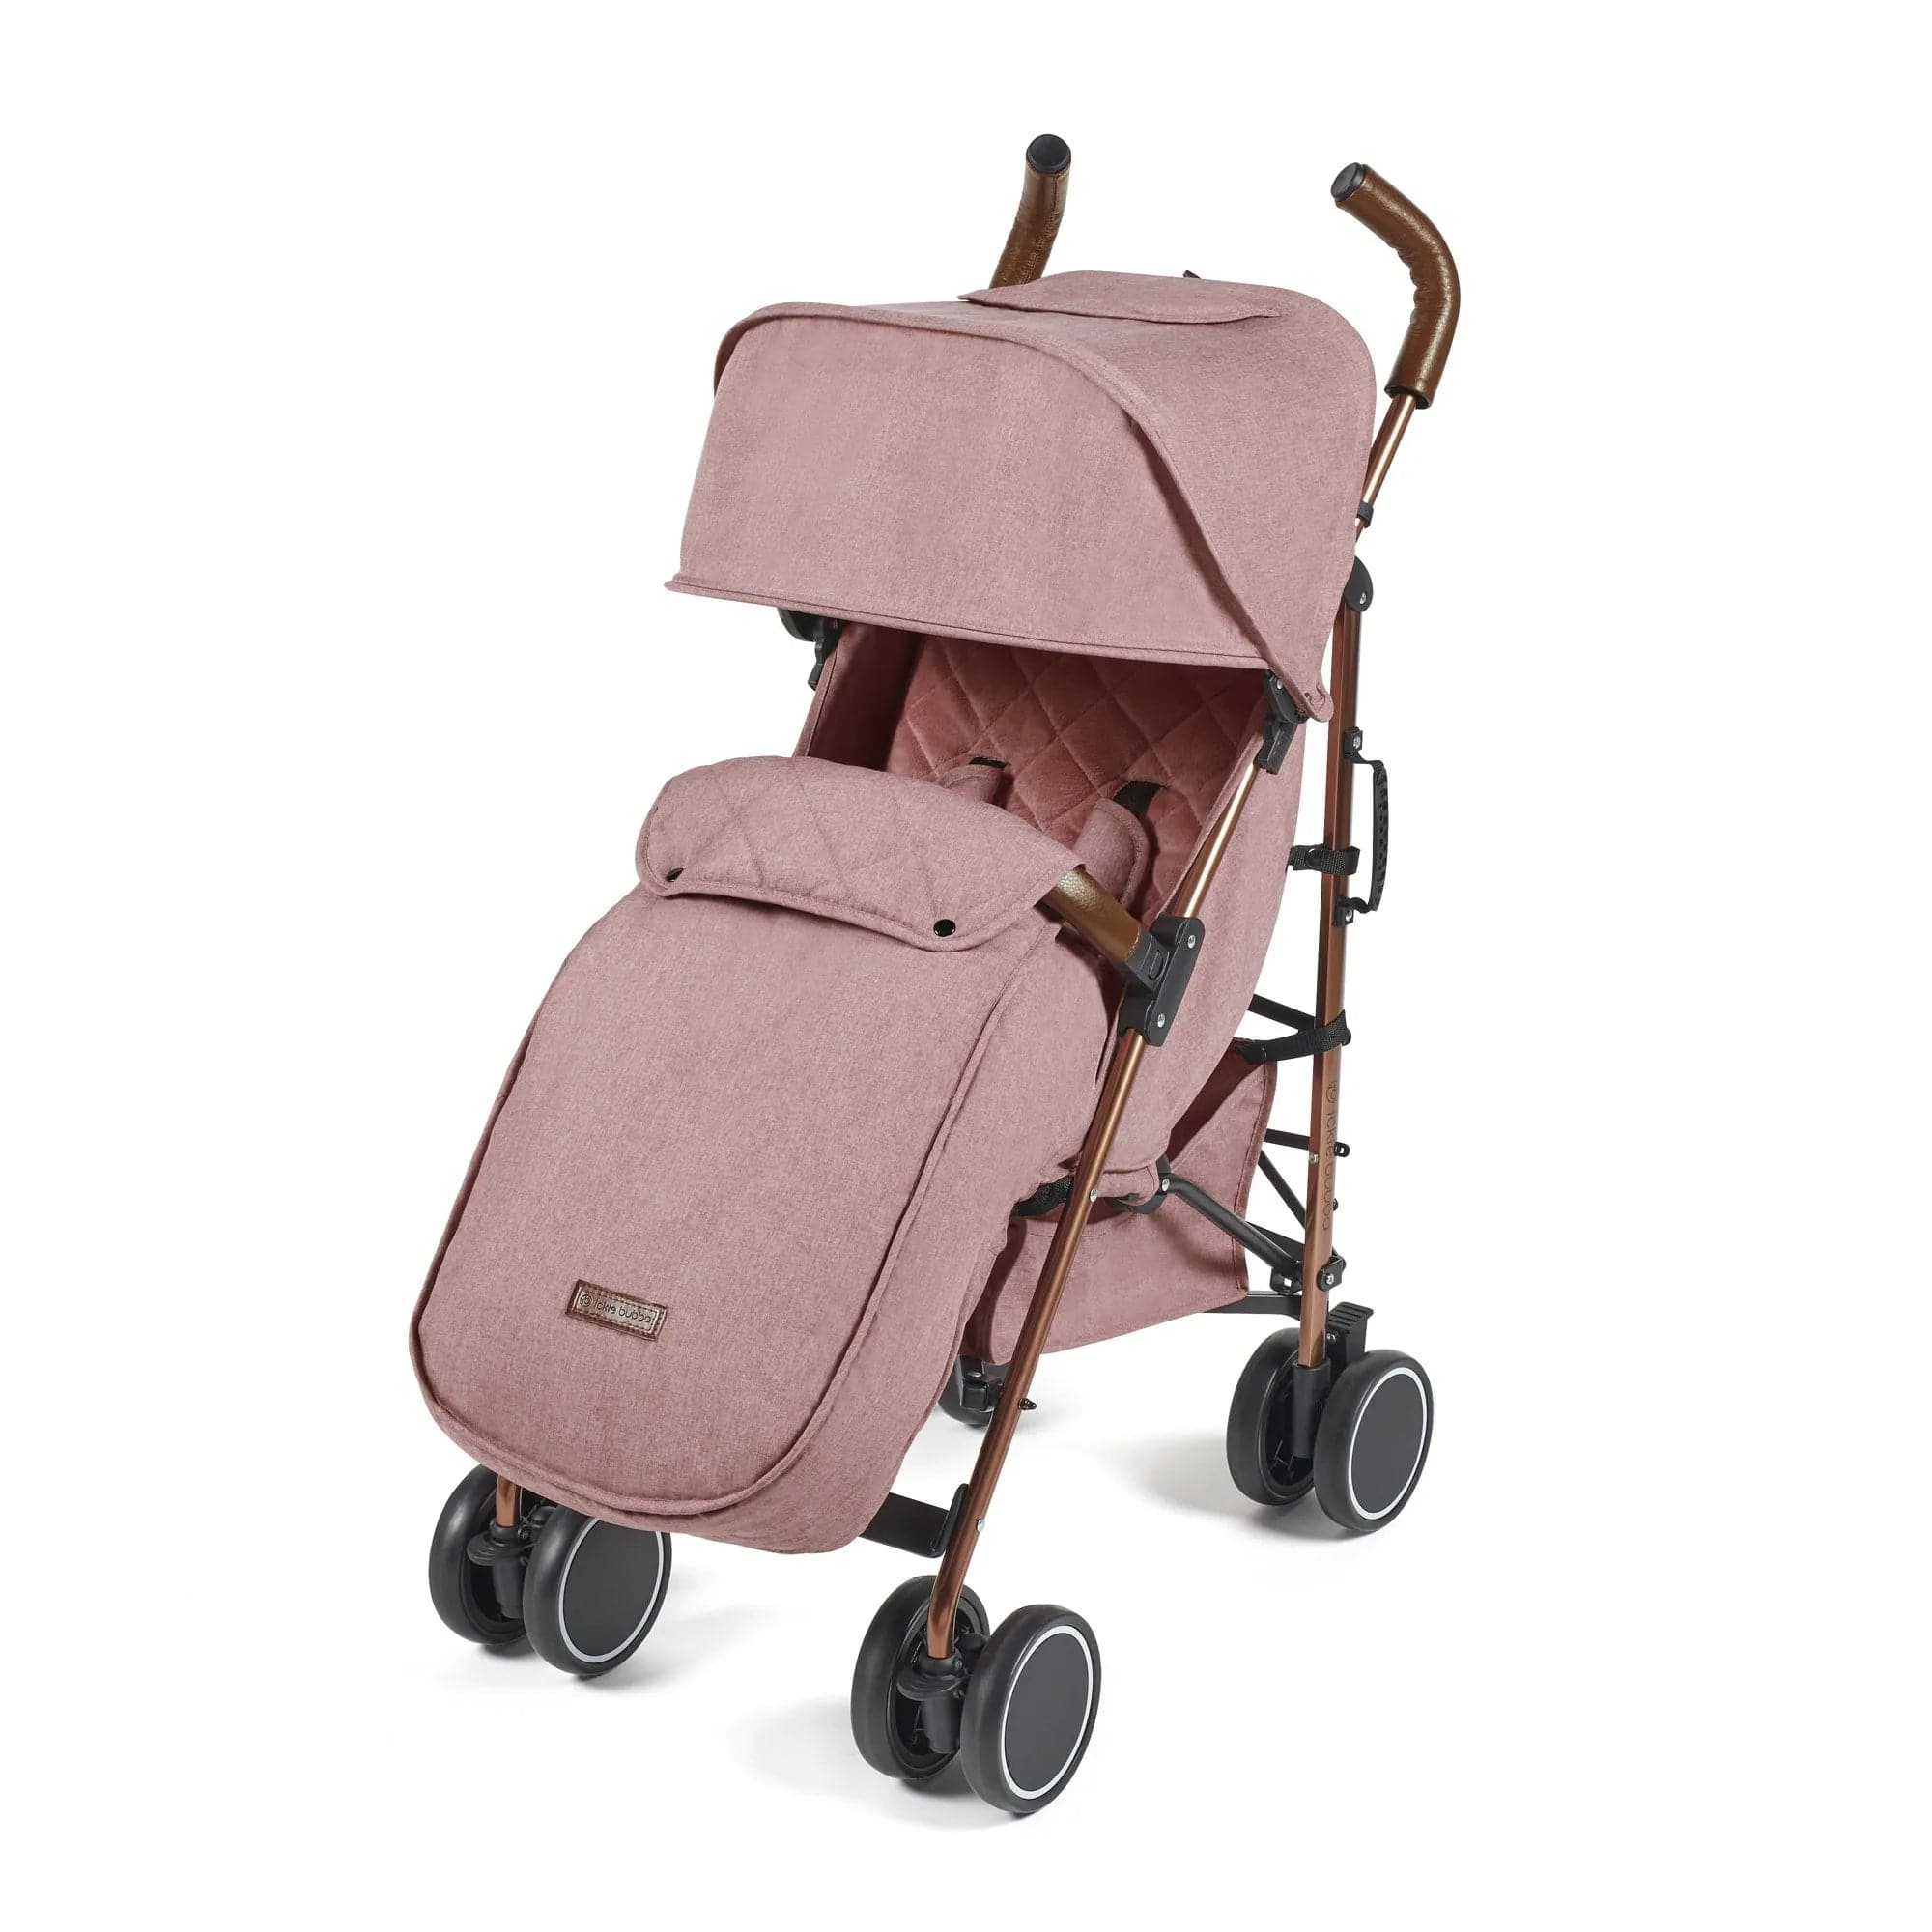 Ickle bubba Discovery Prime Stroller -  Rose Gold / Dusky Pink - For Your Little One